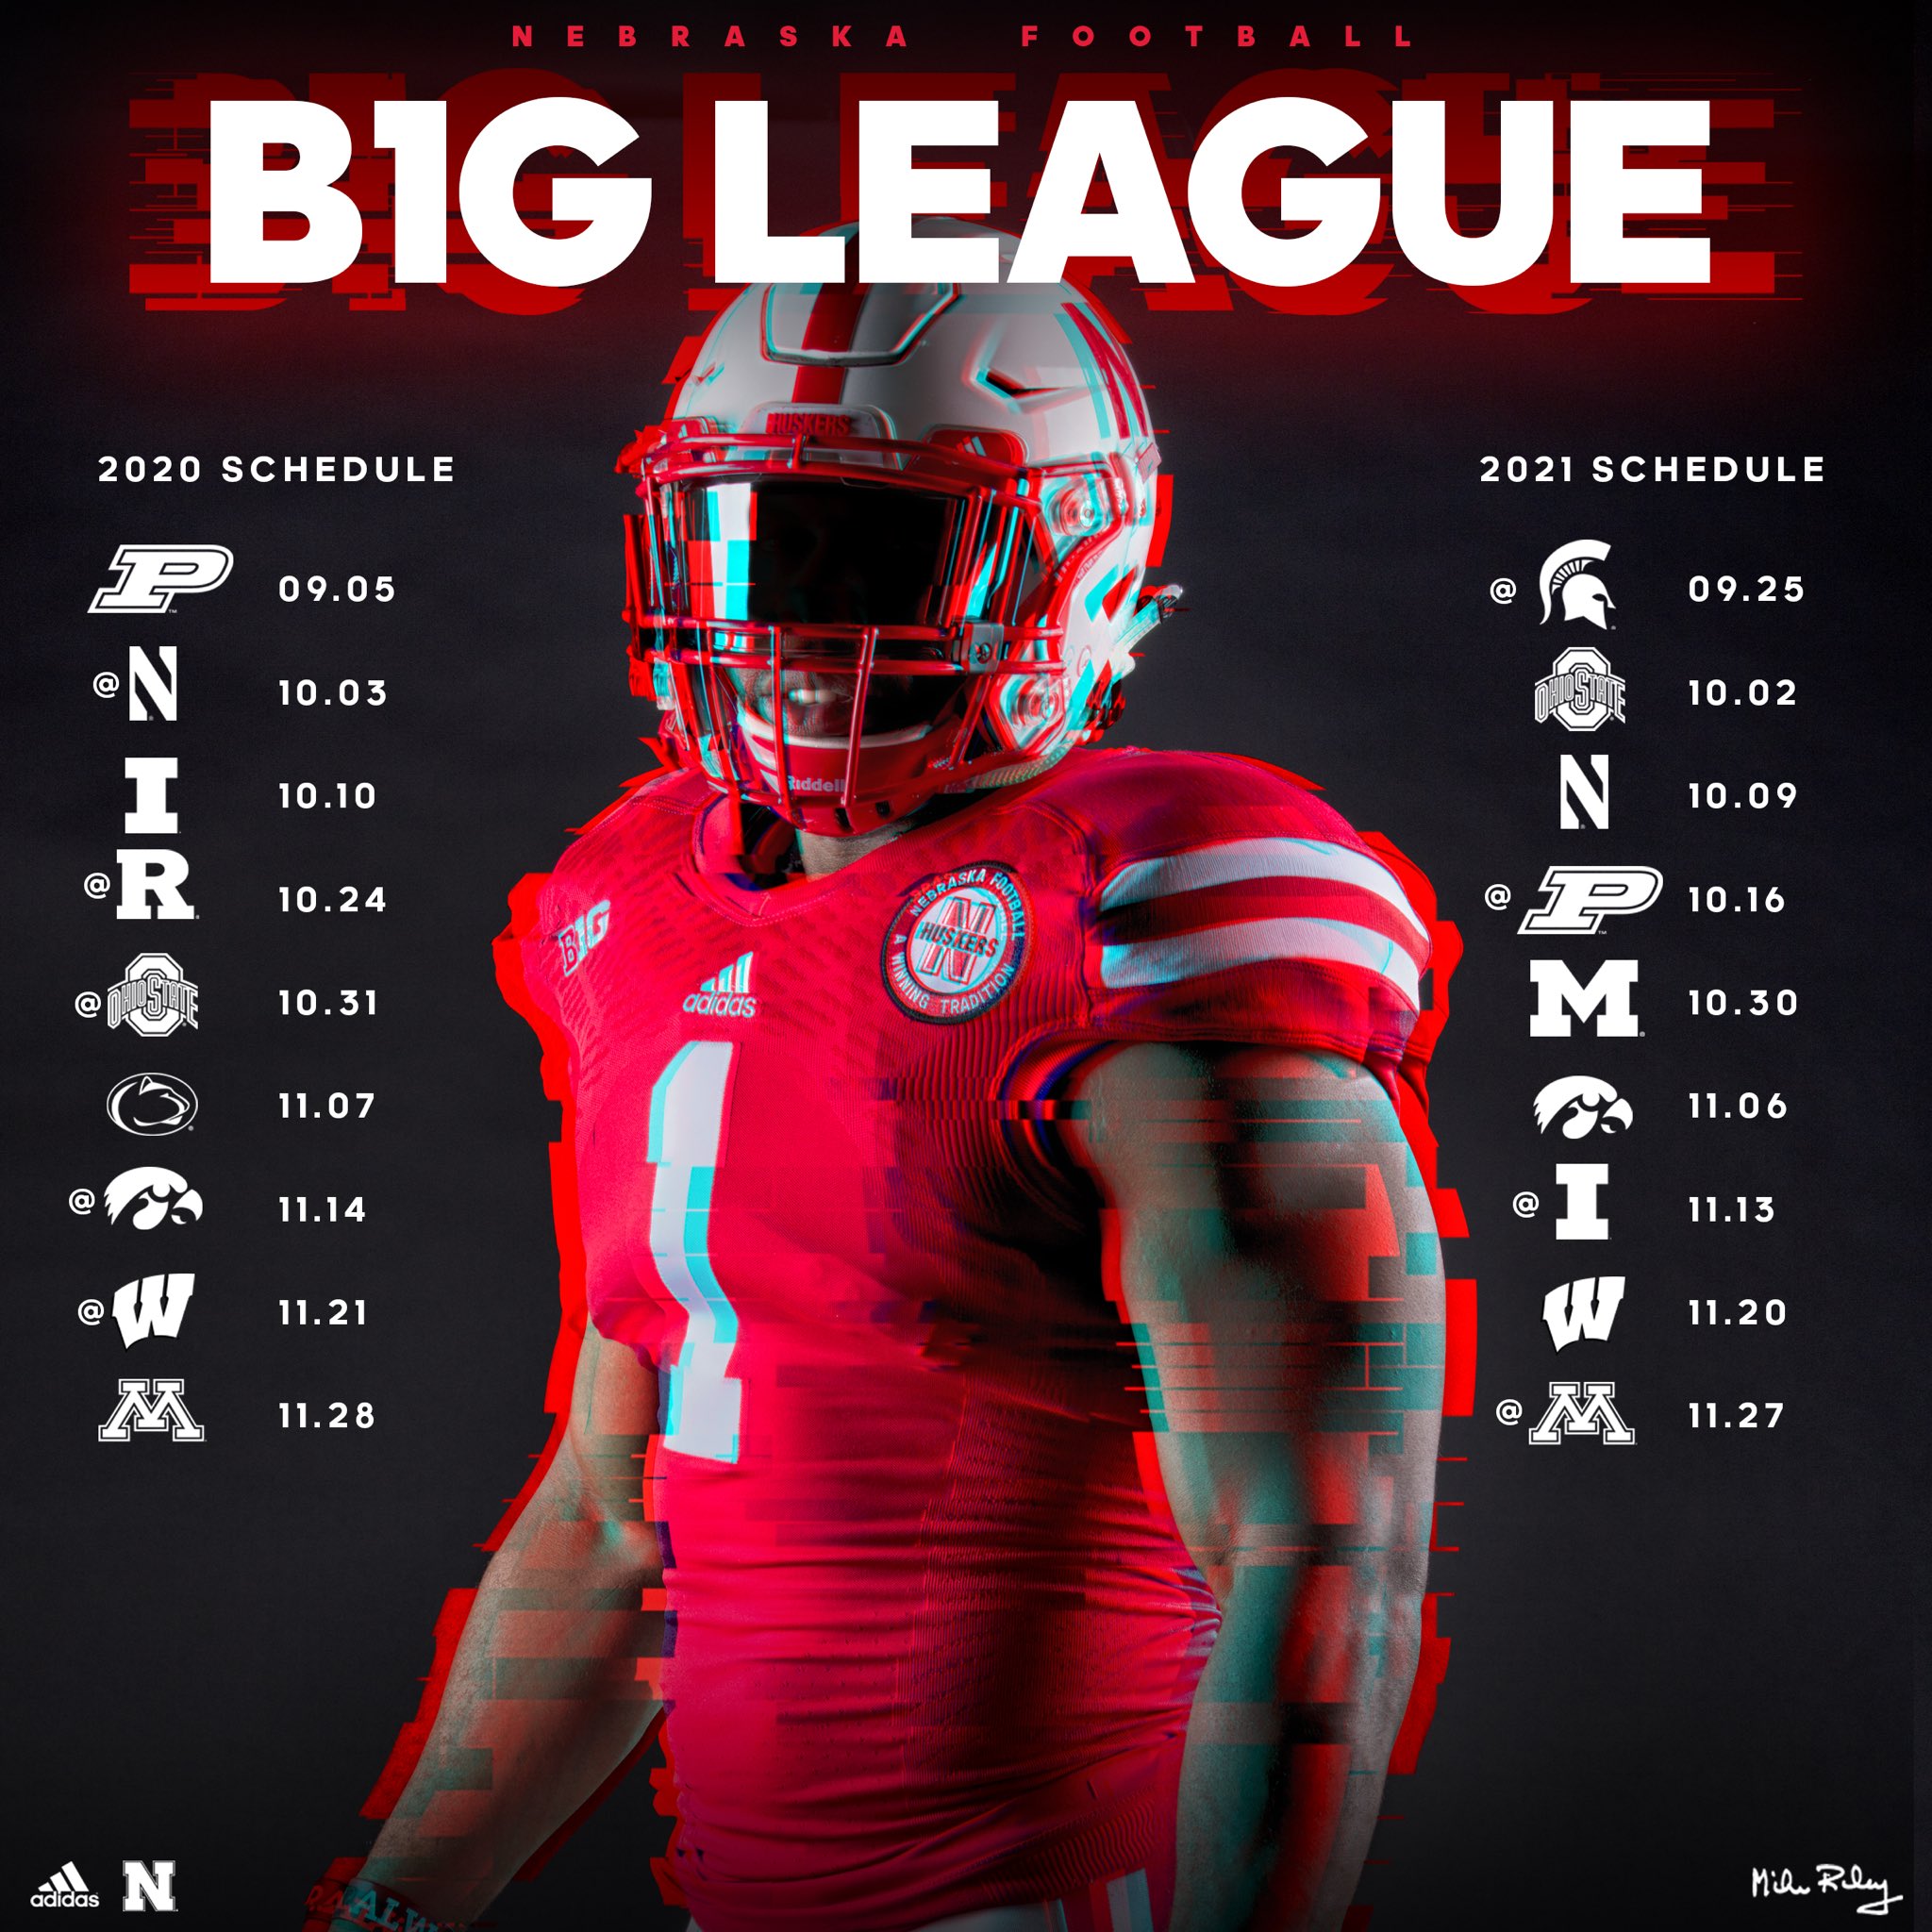 Nebraska Football on Twitter: "The #B1G Schedule for 2020 and 2021 has